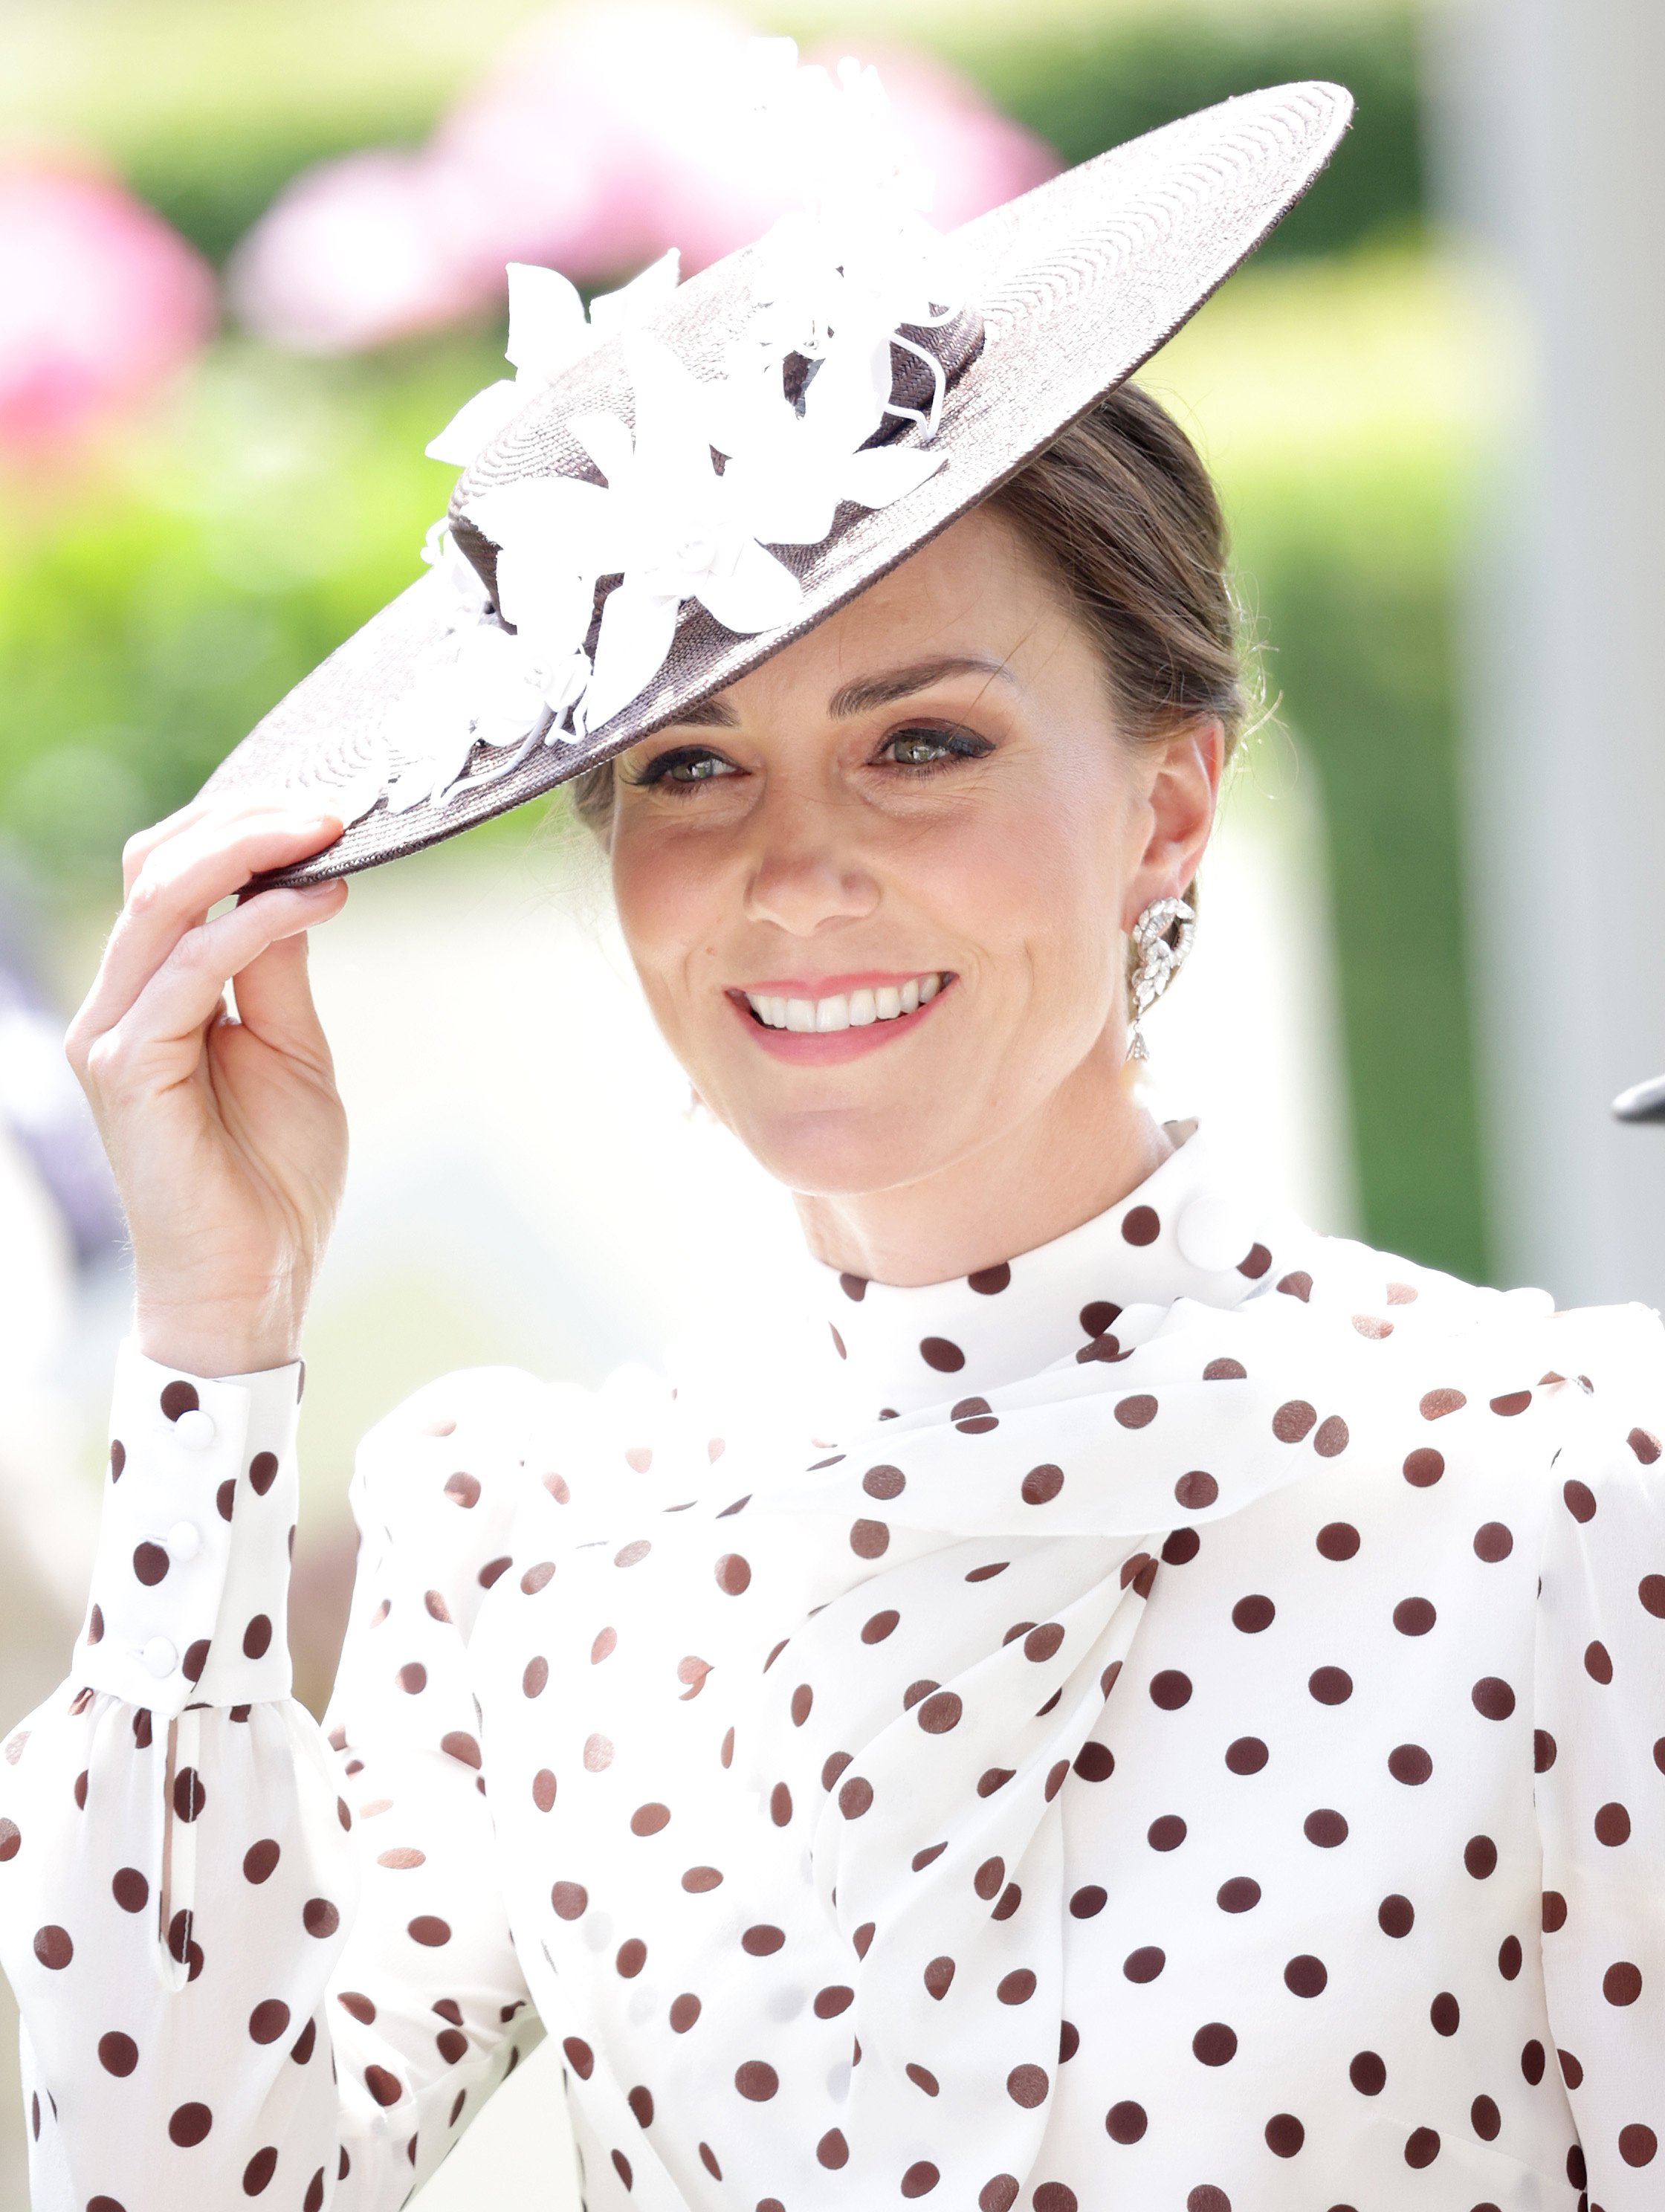 Kate Middleton pictured in the parade ring during Royal Ascot 2022 at Ascot Racecourse on June 17, 2022 in Ascot, England. / Source: Getty Images